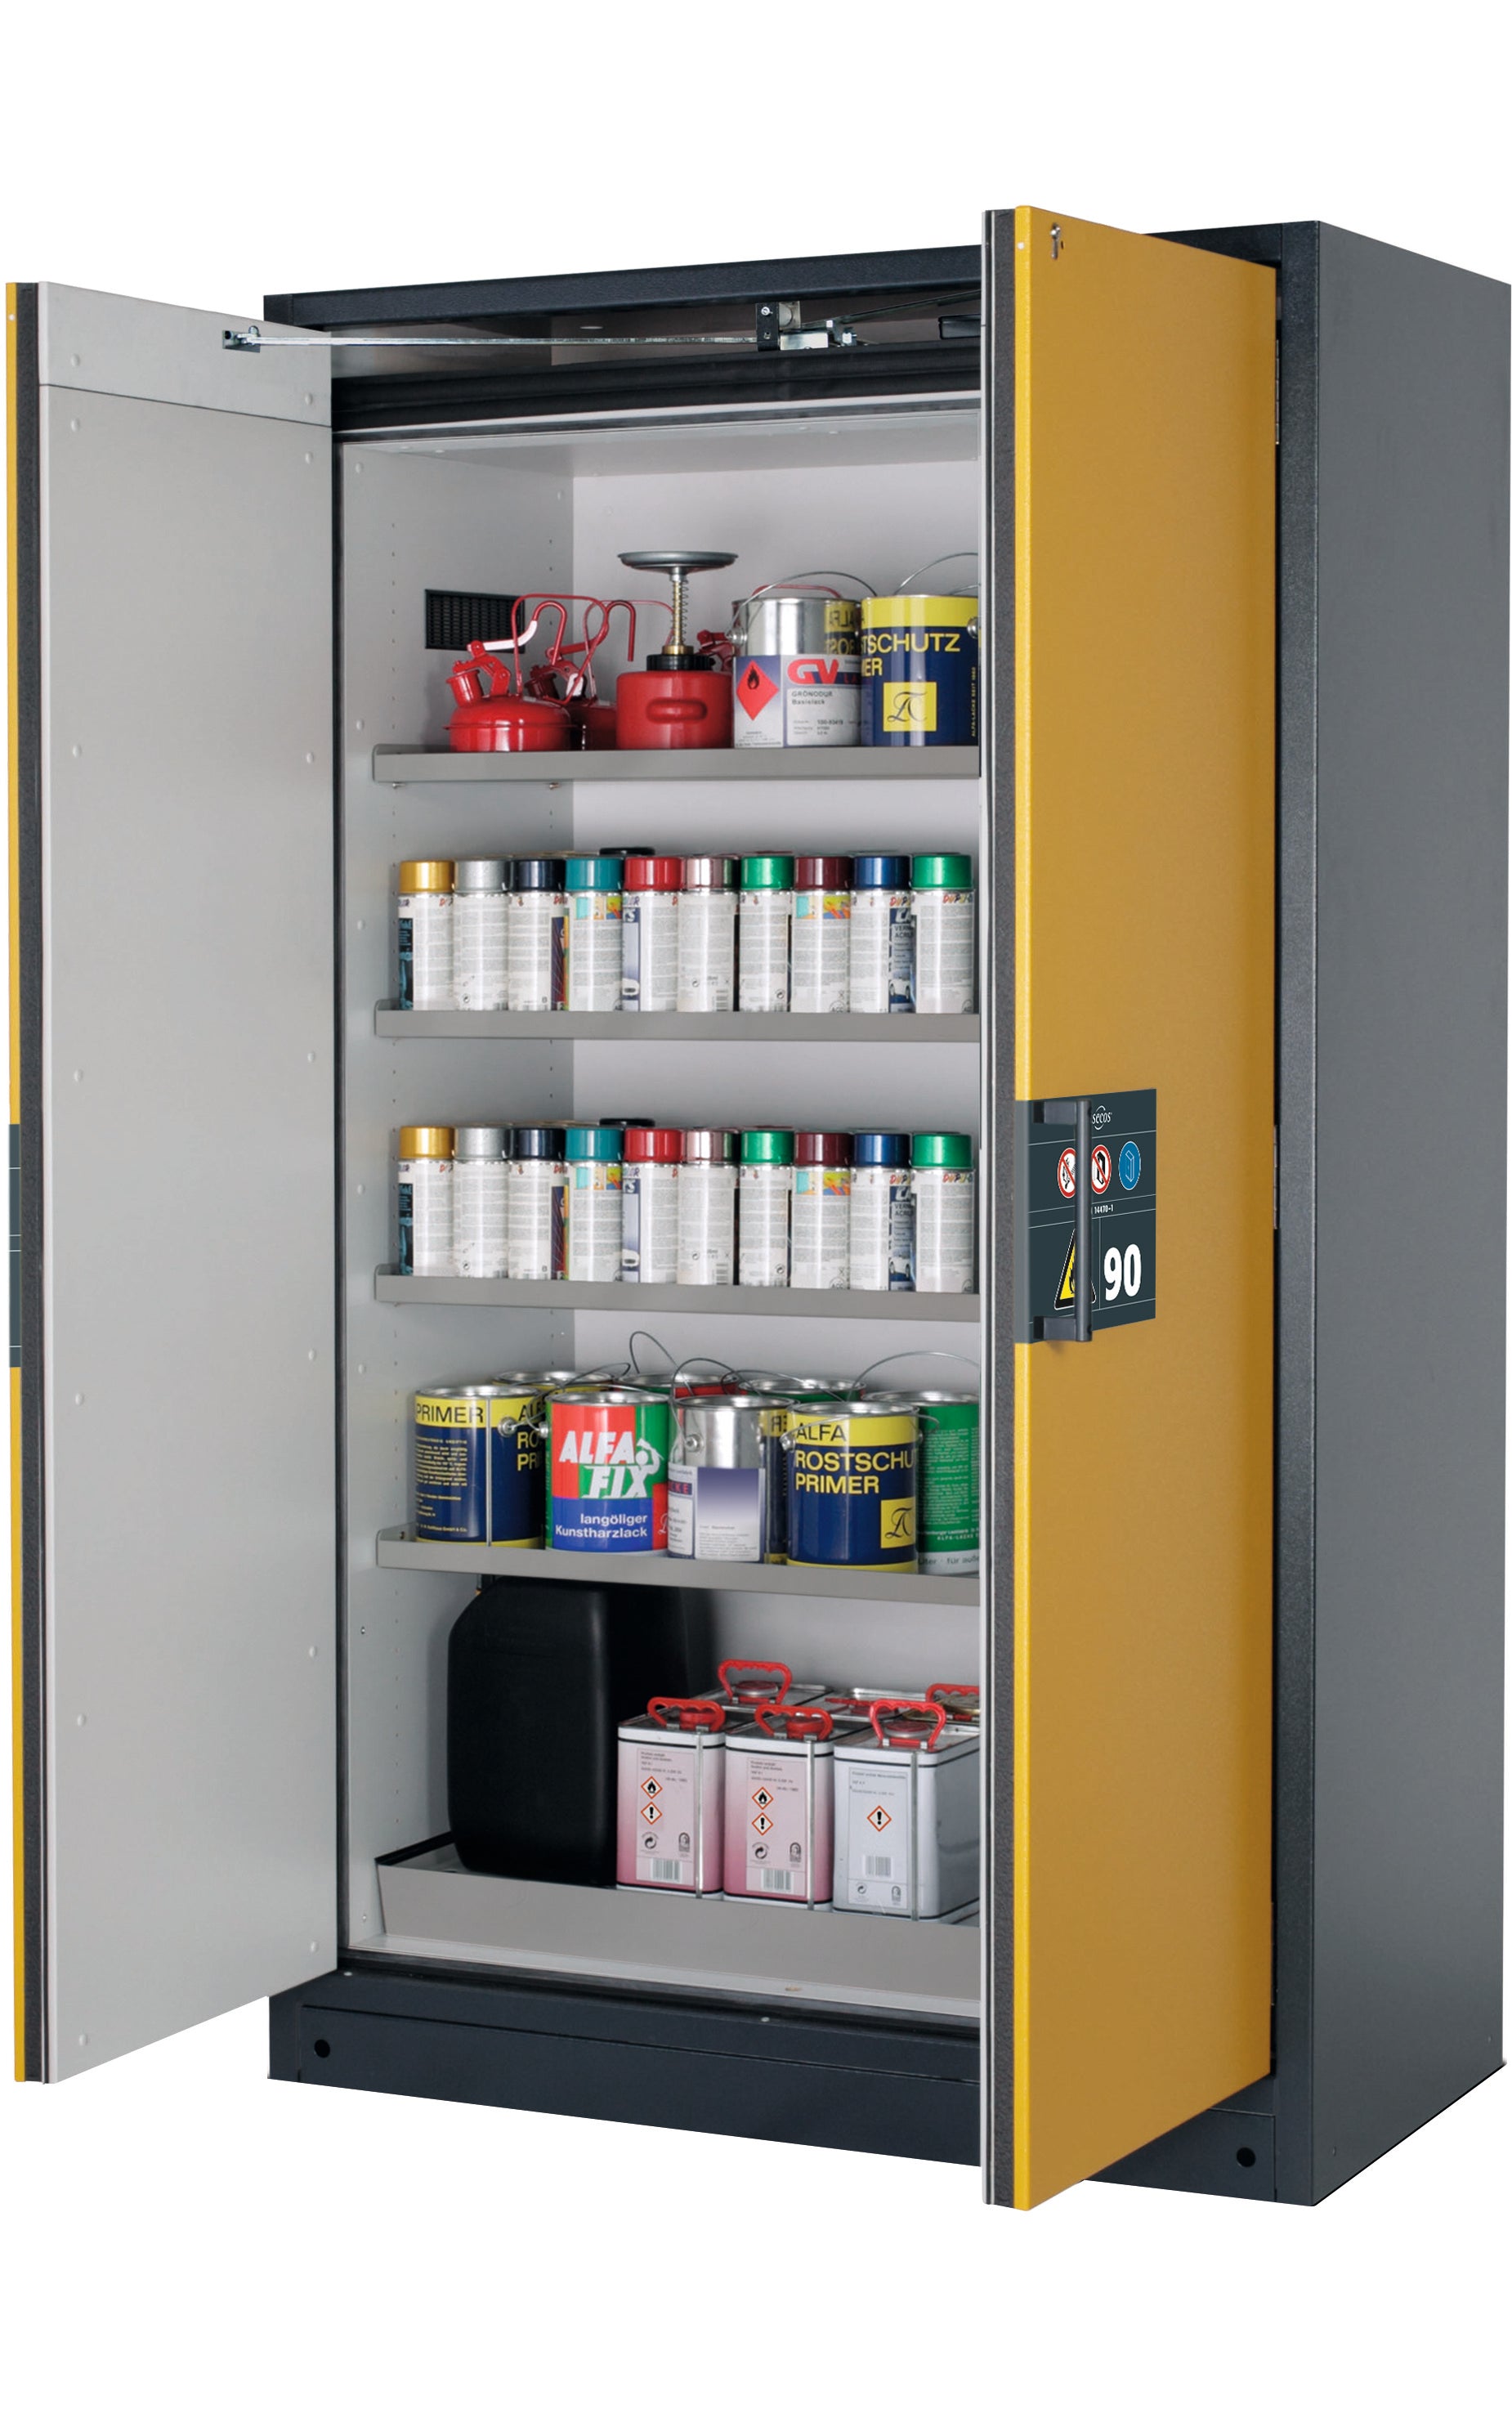 Type 90 safety storage cabinet Q-PEGASUS-90 model Q90.195.120.WDAC in warning yellow RAL 1004 with 4x shelf standard (stainless steel 1.4301),